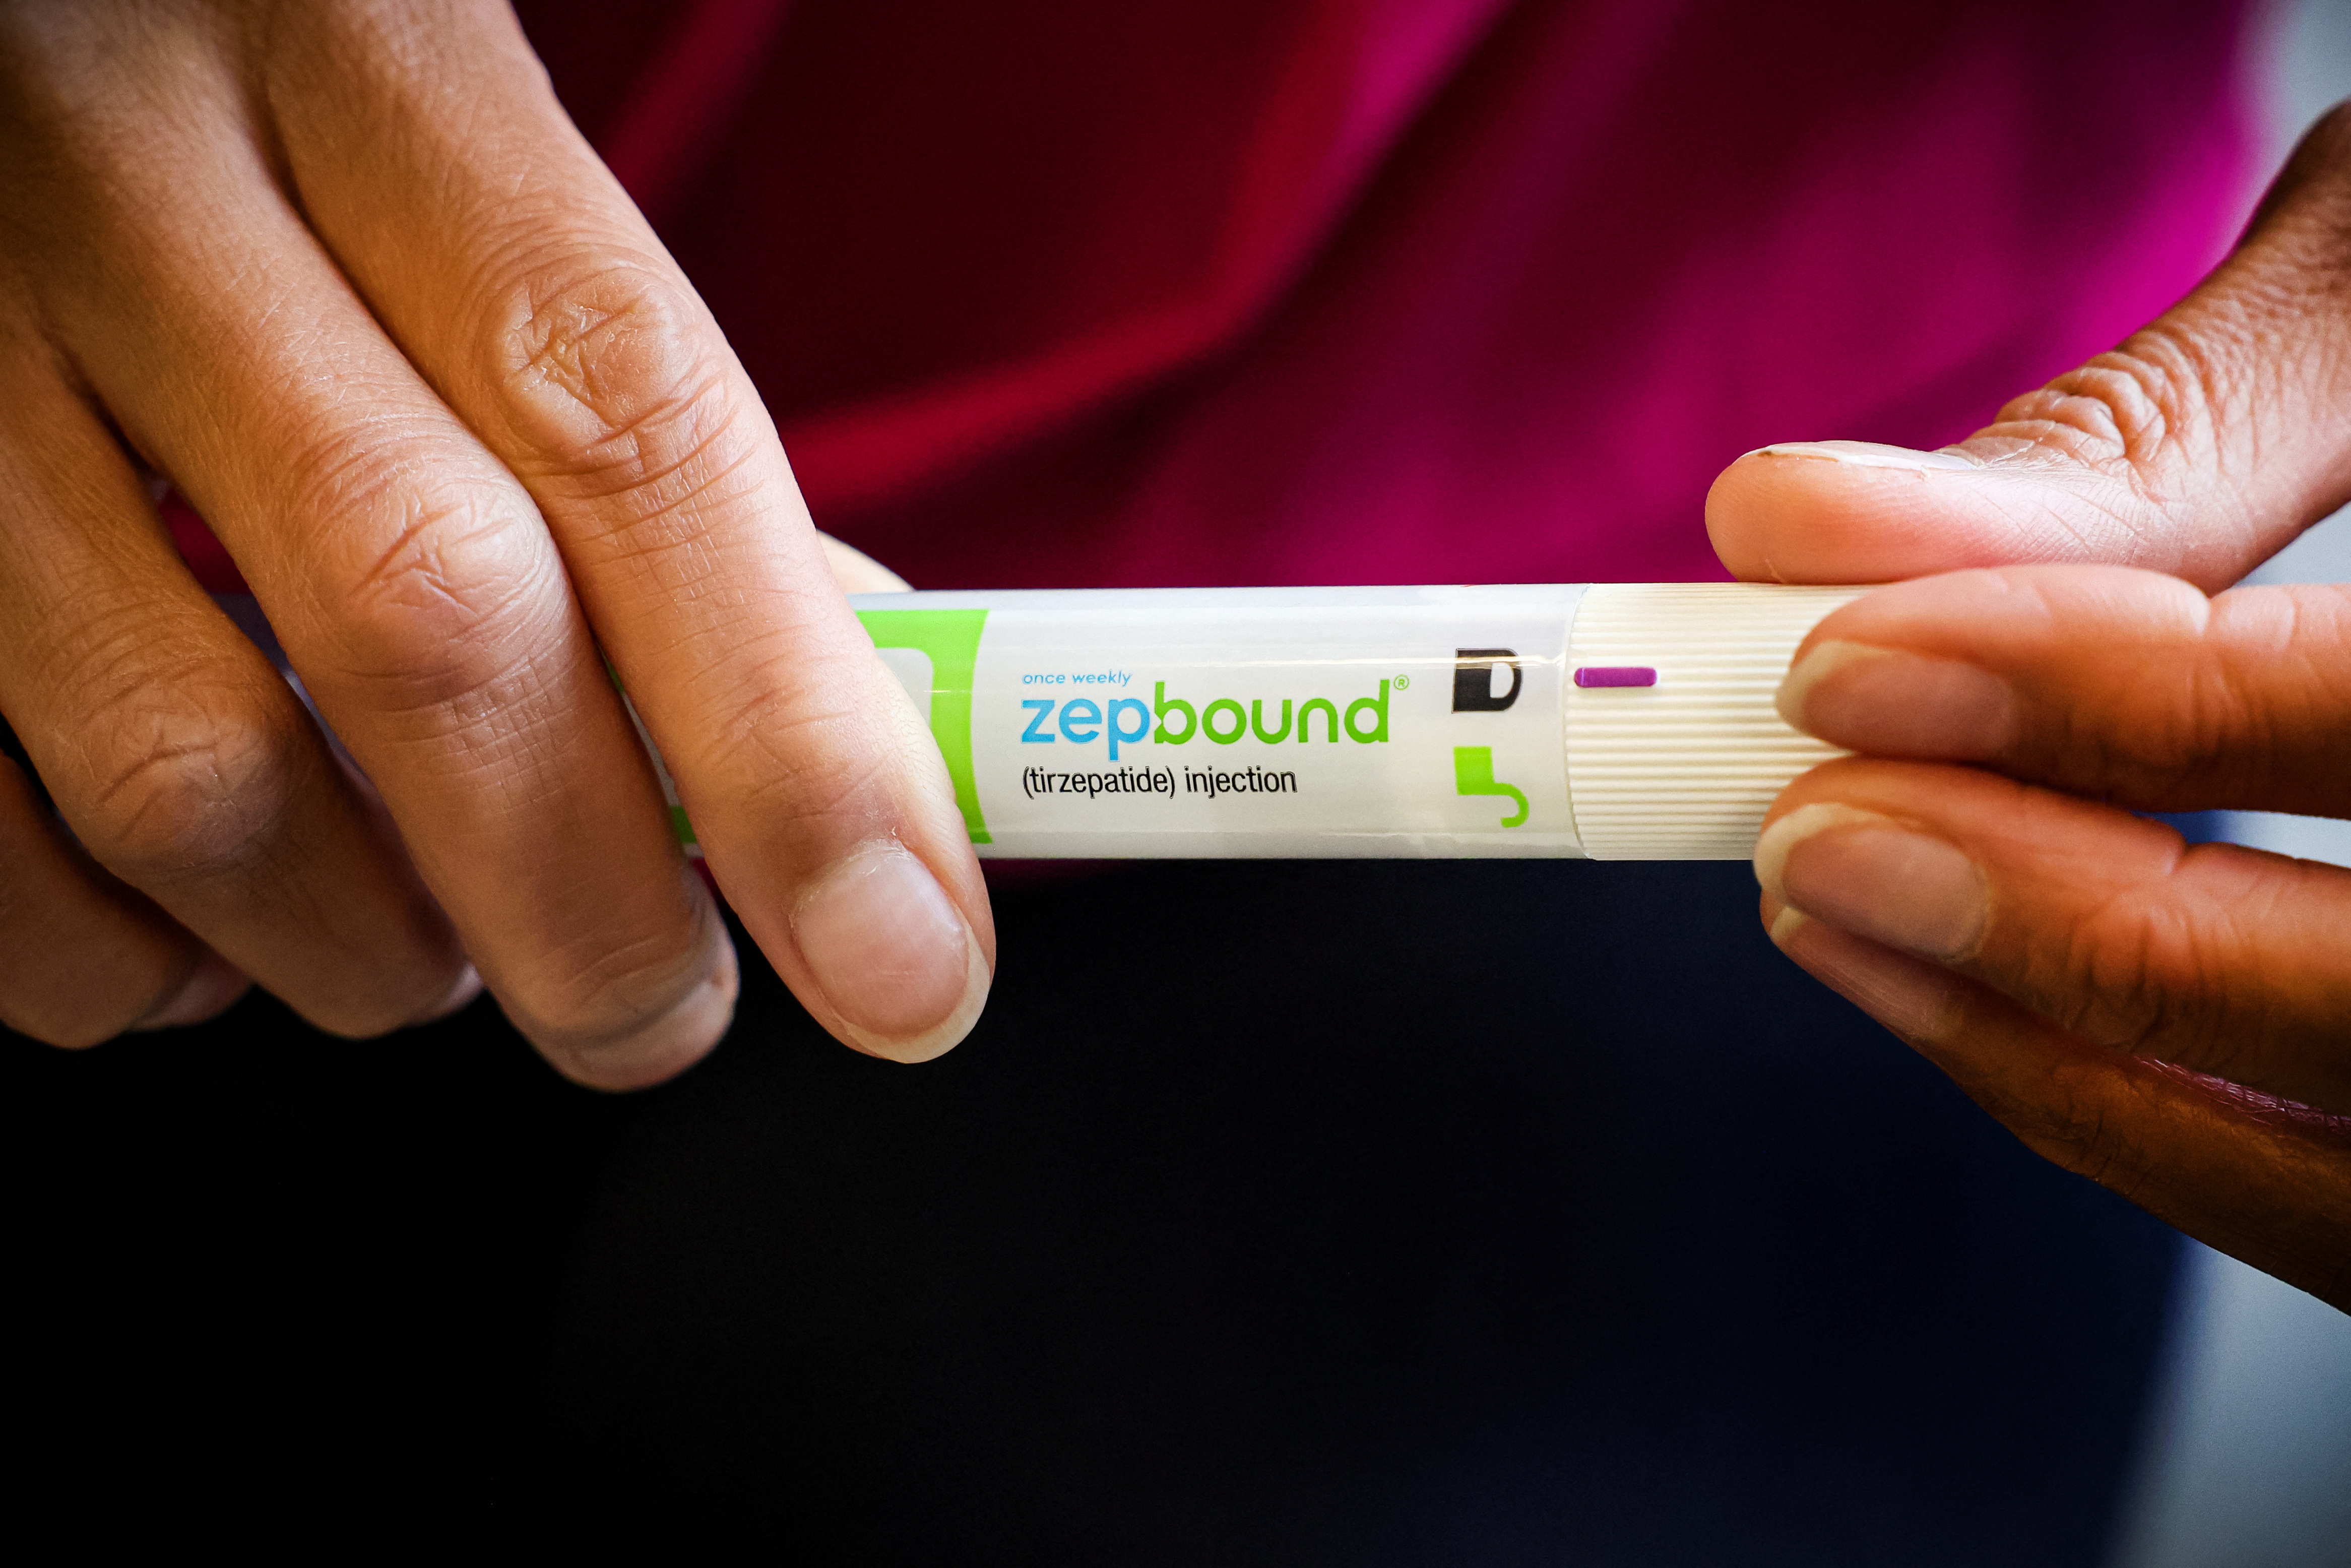 An injection pen of Zepbound, Eli Lilly’s weight loss drug, is displayed in New York